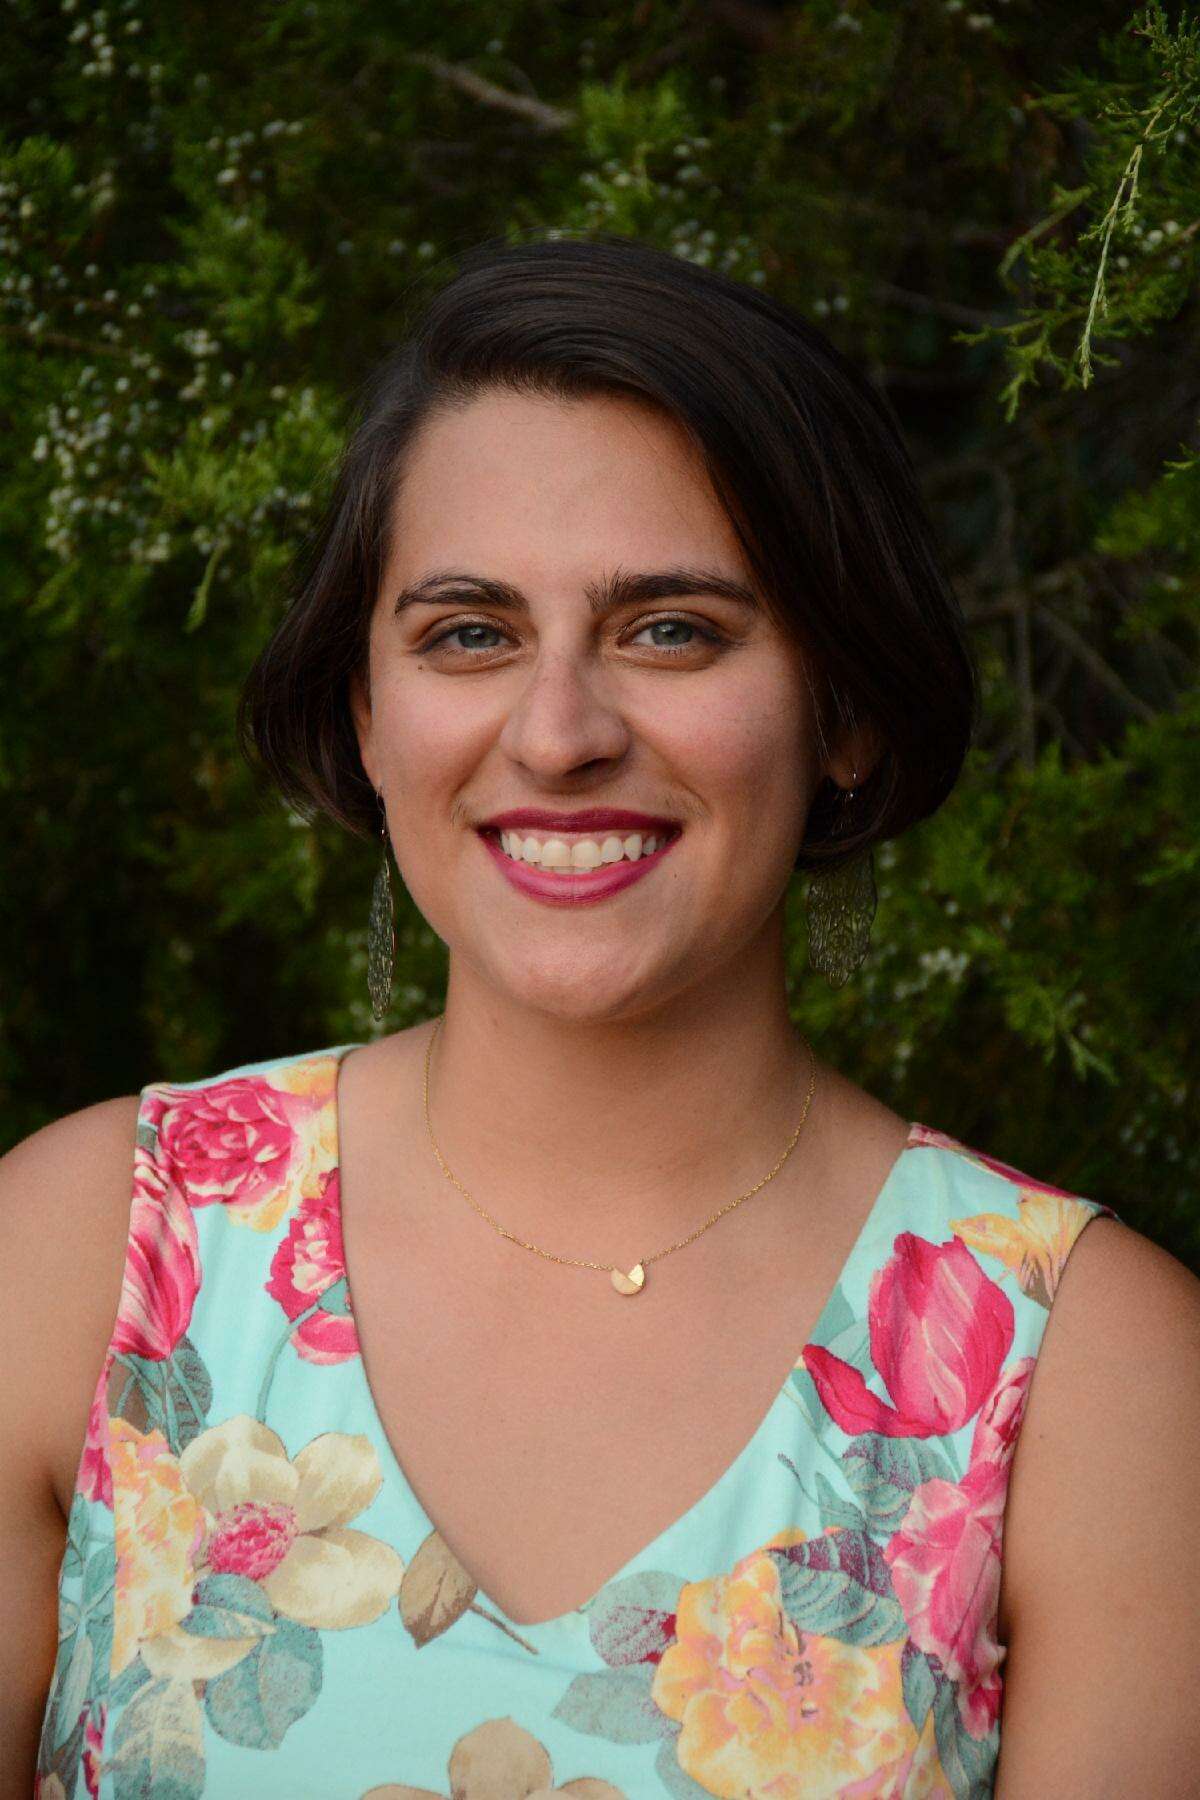 Aurel Garza-Tucker is now the Director of Program and Operations for Young Texas Artists (YTA). Before joining the YTA team, she was the Assistant Director of Education and Production at the Austin Chamber Music Center.